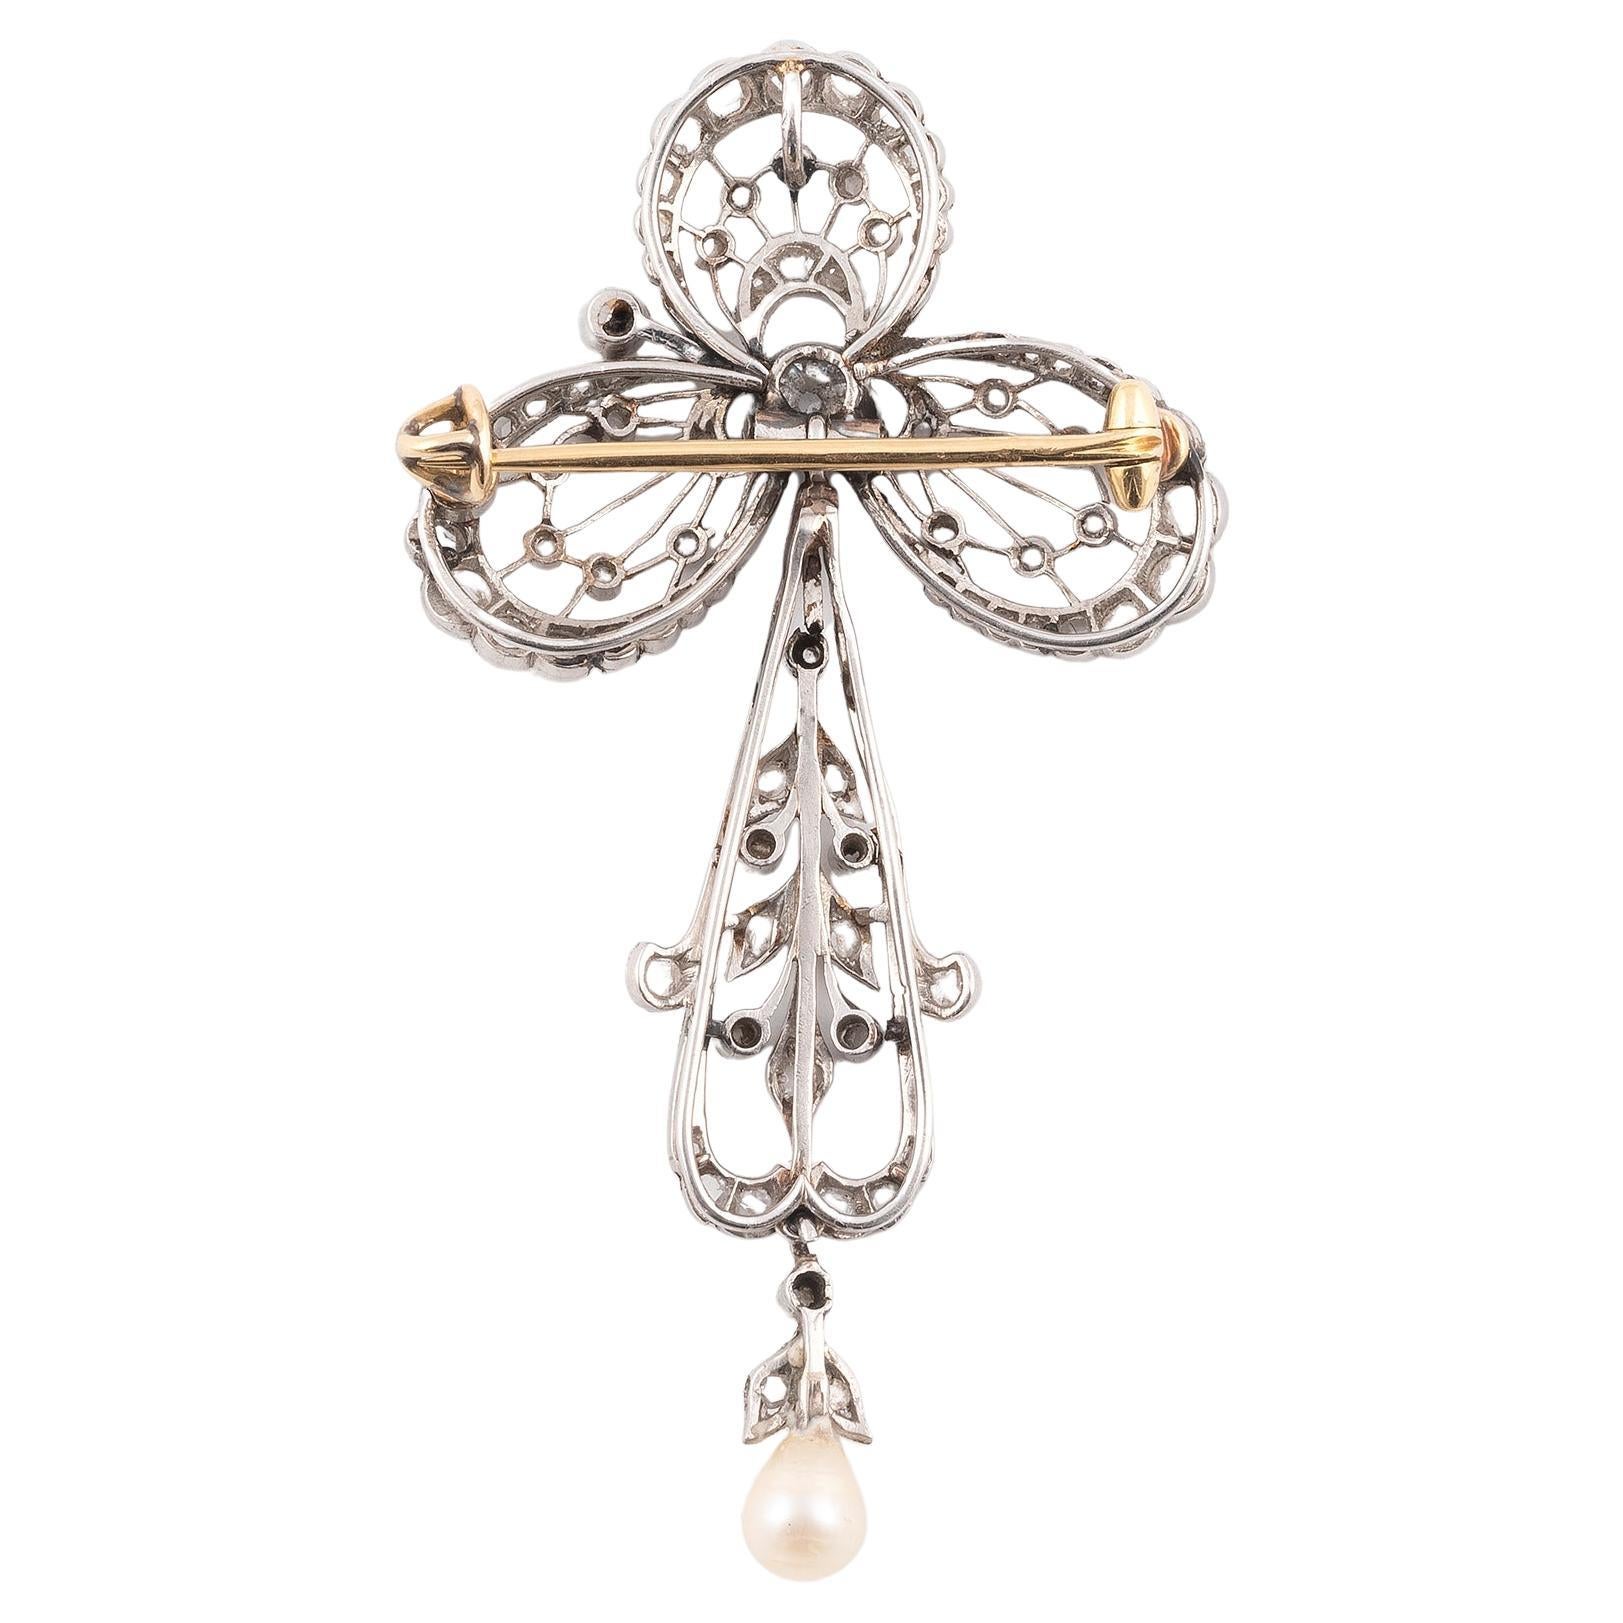 

Brooch and pendant trilobe' in openwork platinum, set with rose-cut diamonds and a larger old-cut diamond in the centre, holding a motif and natural pearl in pendants.
Size : 2,8cm x 5,5cm
Weight: 8,5gr